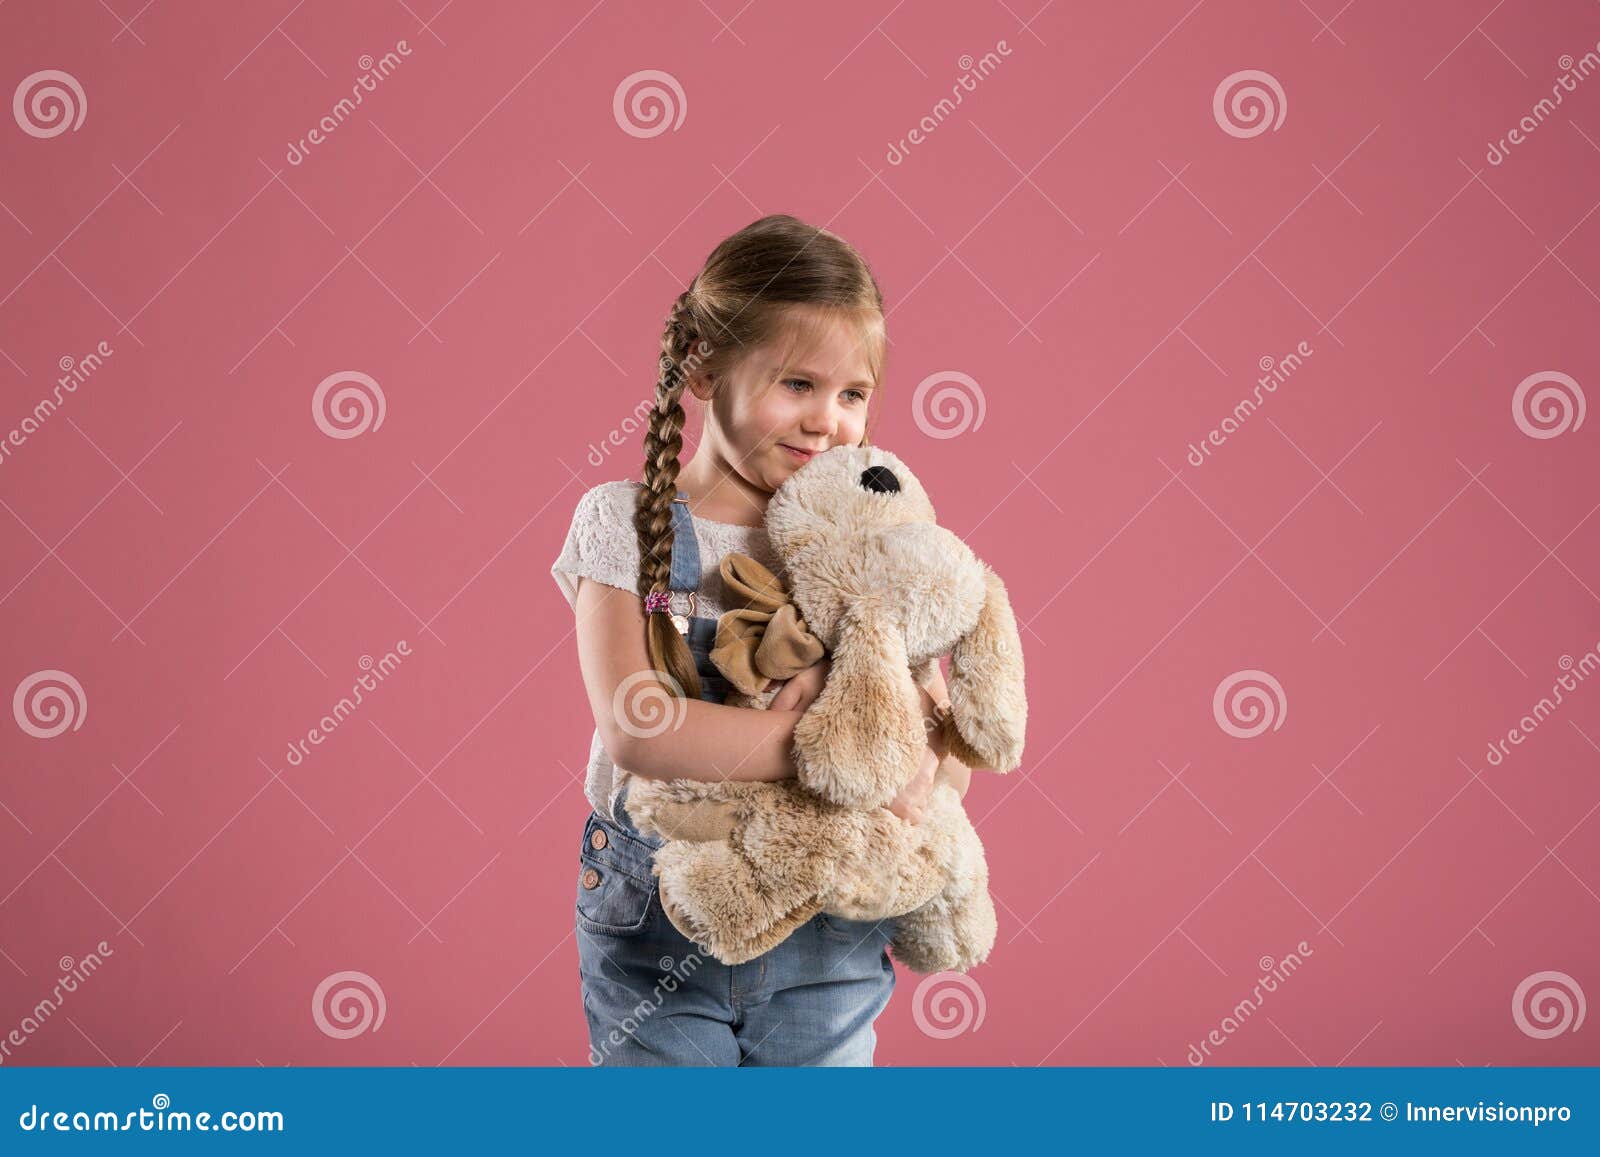 Happy Young Girl Hugging Stuffed Toy Stock Photo - Image of dungarees ...